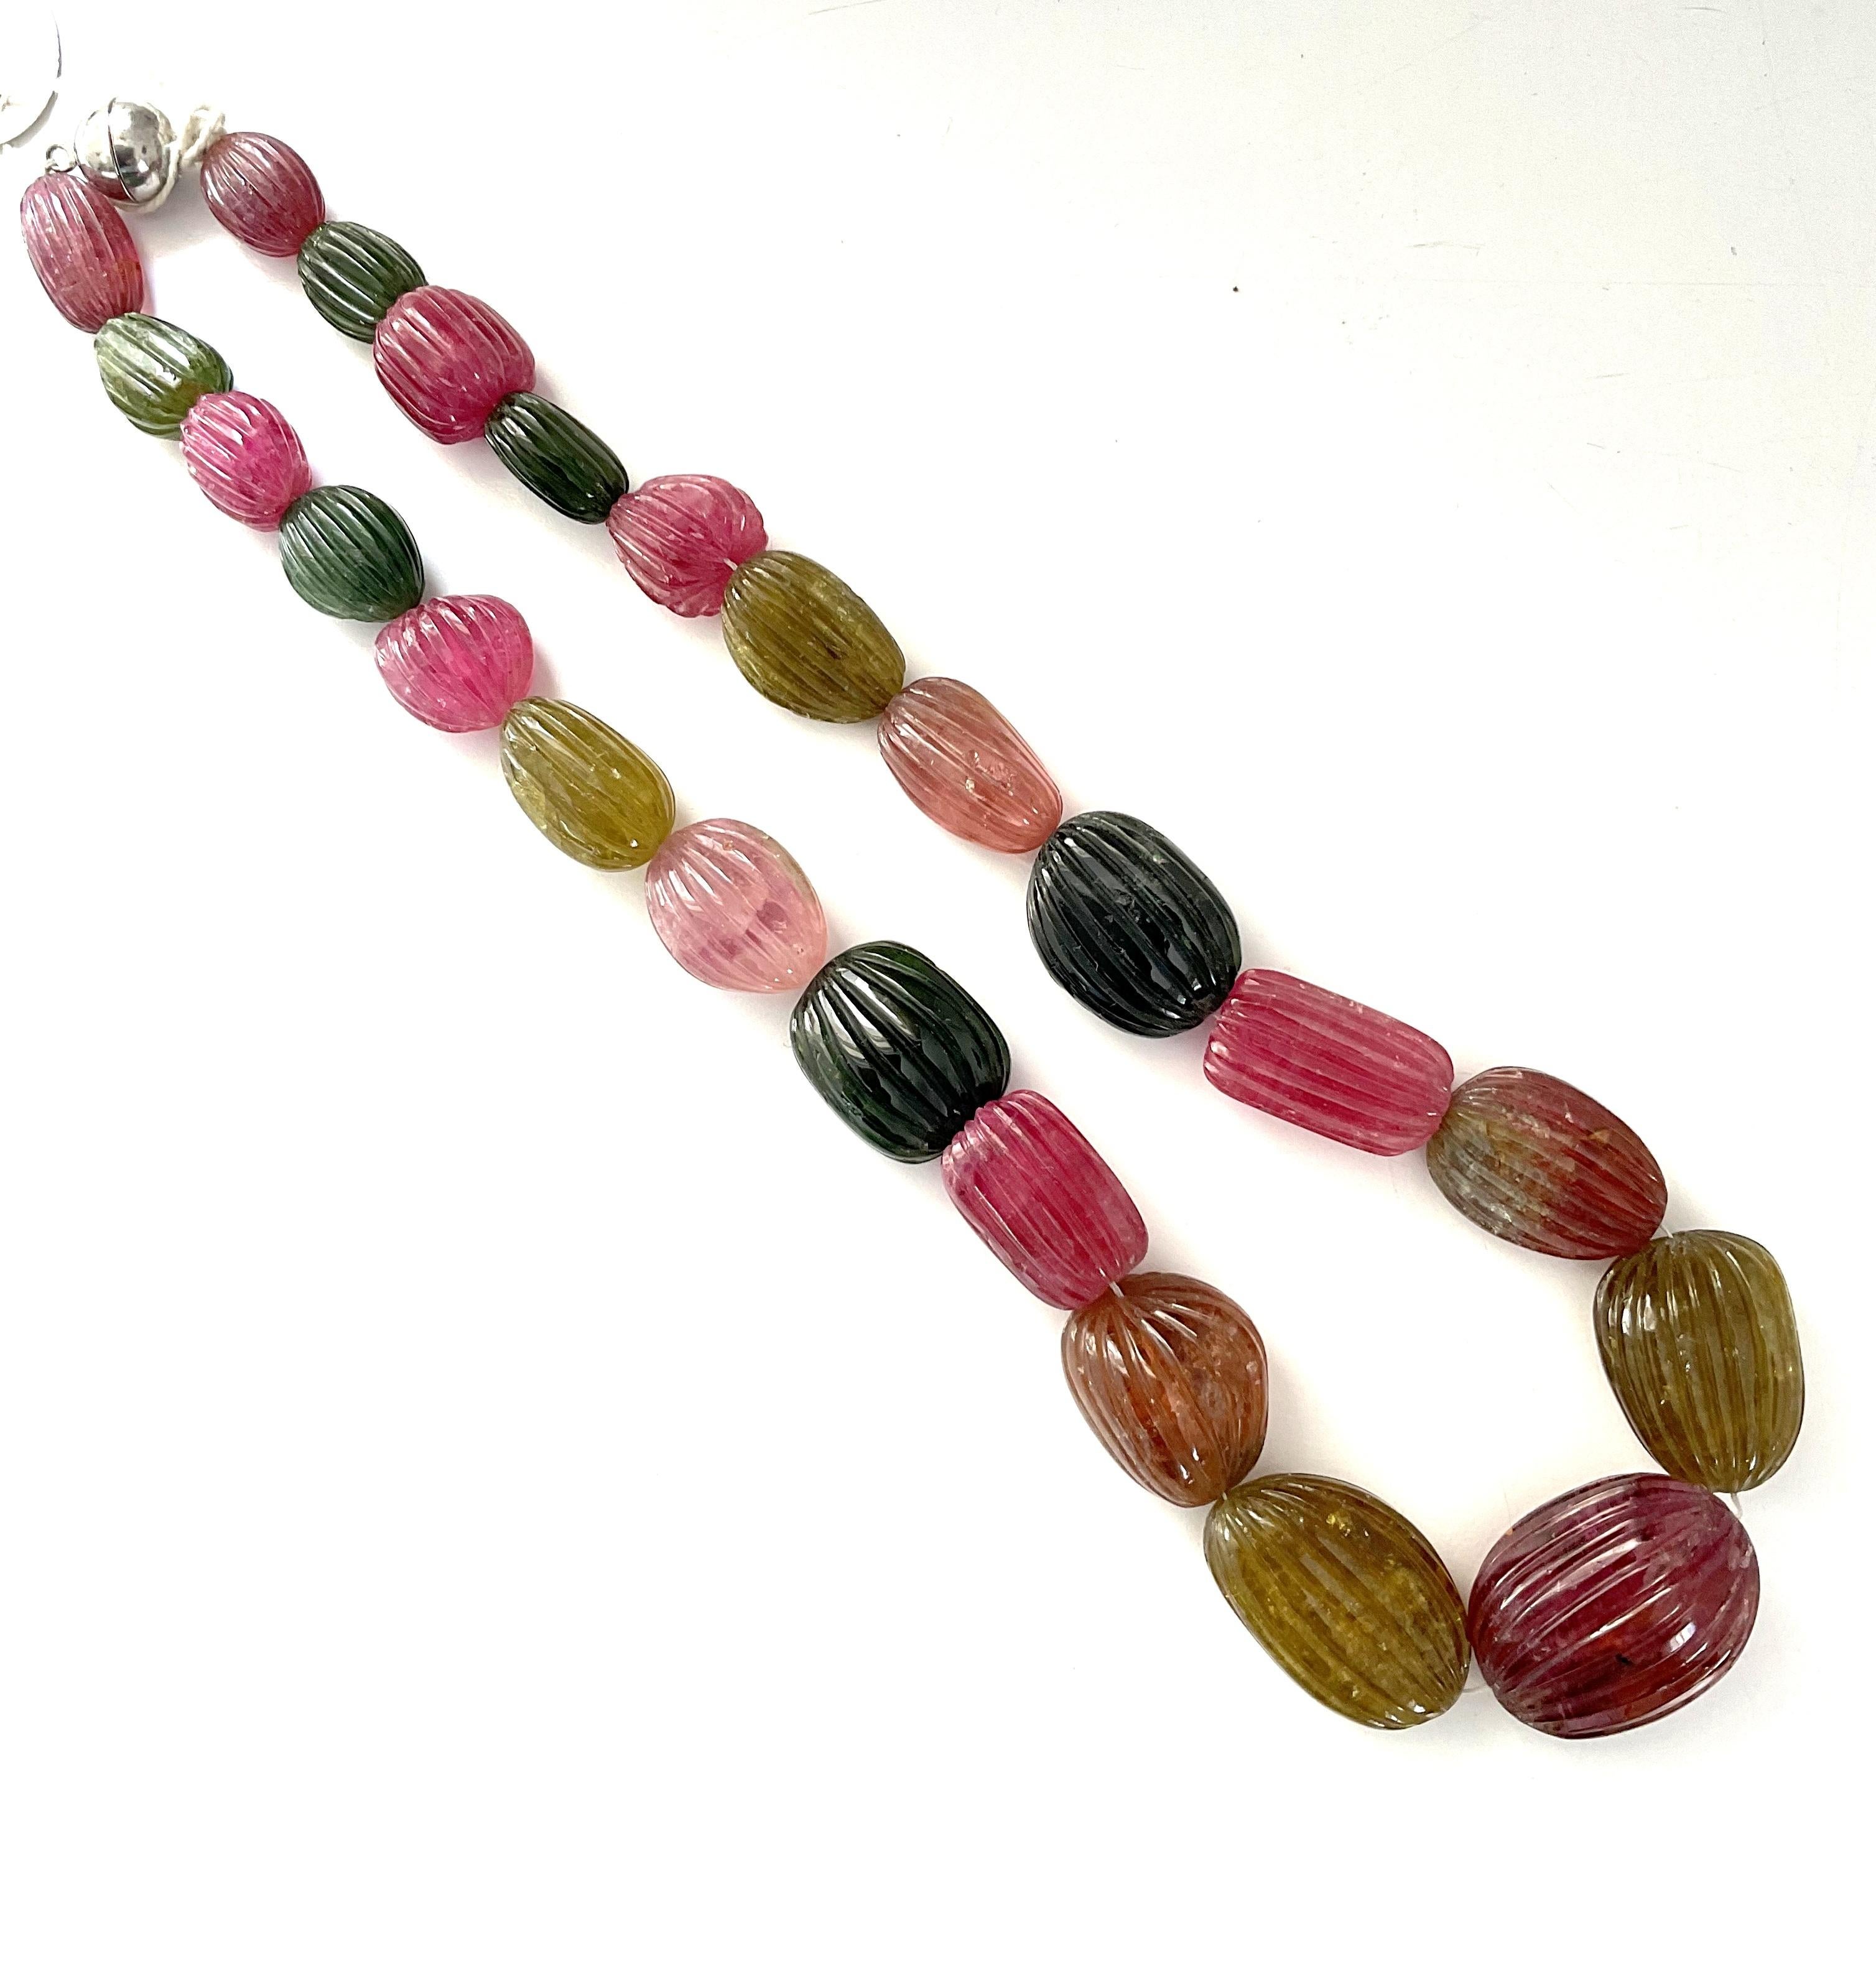 871.10 Carats Multi Tourmaline Carved Tumbled Necklace Multi Color Natural Gem

Gemstone - Multi Tourmaline
Weight - 871.10 
Shape - Tumbled
Size - 15x12 To 23x31 MM
Quantity - 1 line
